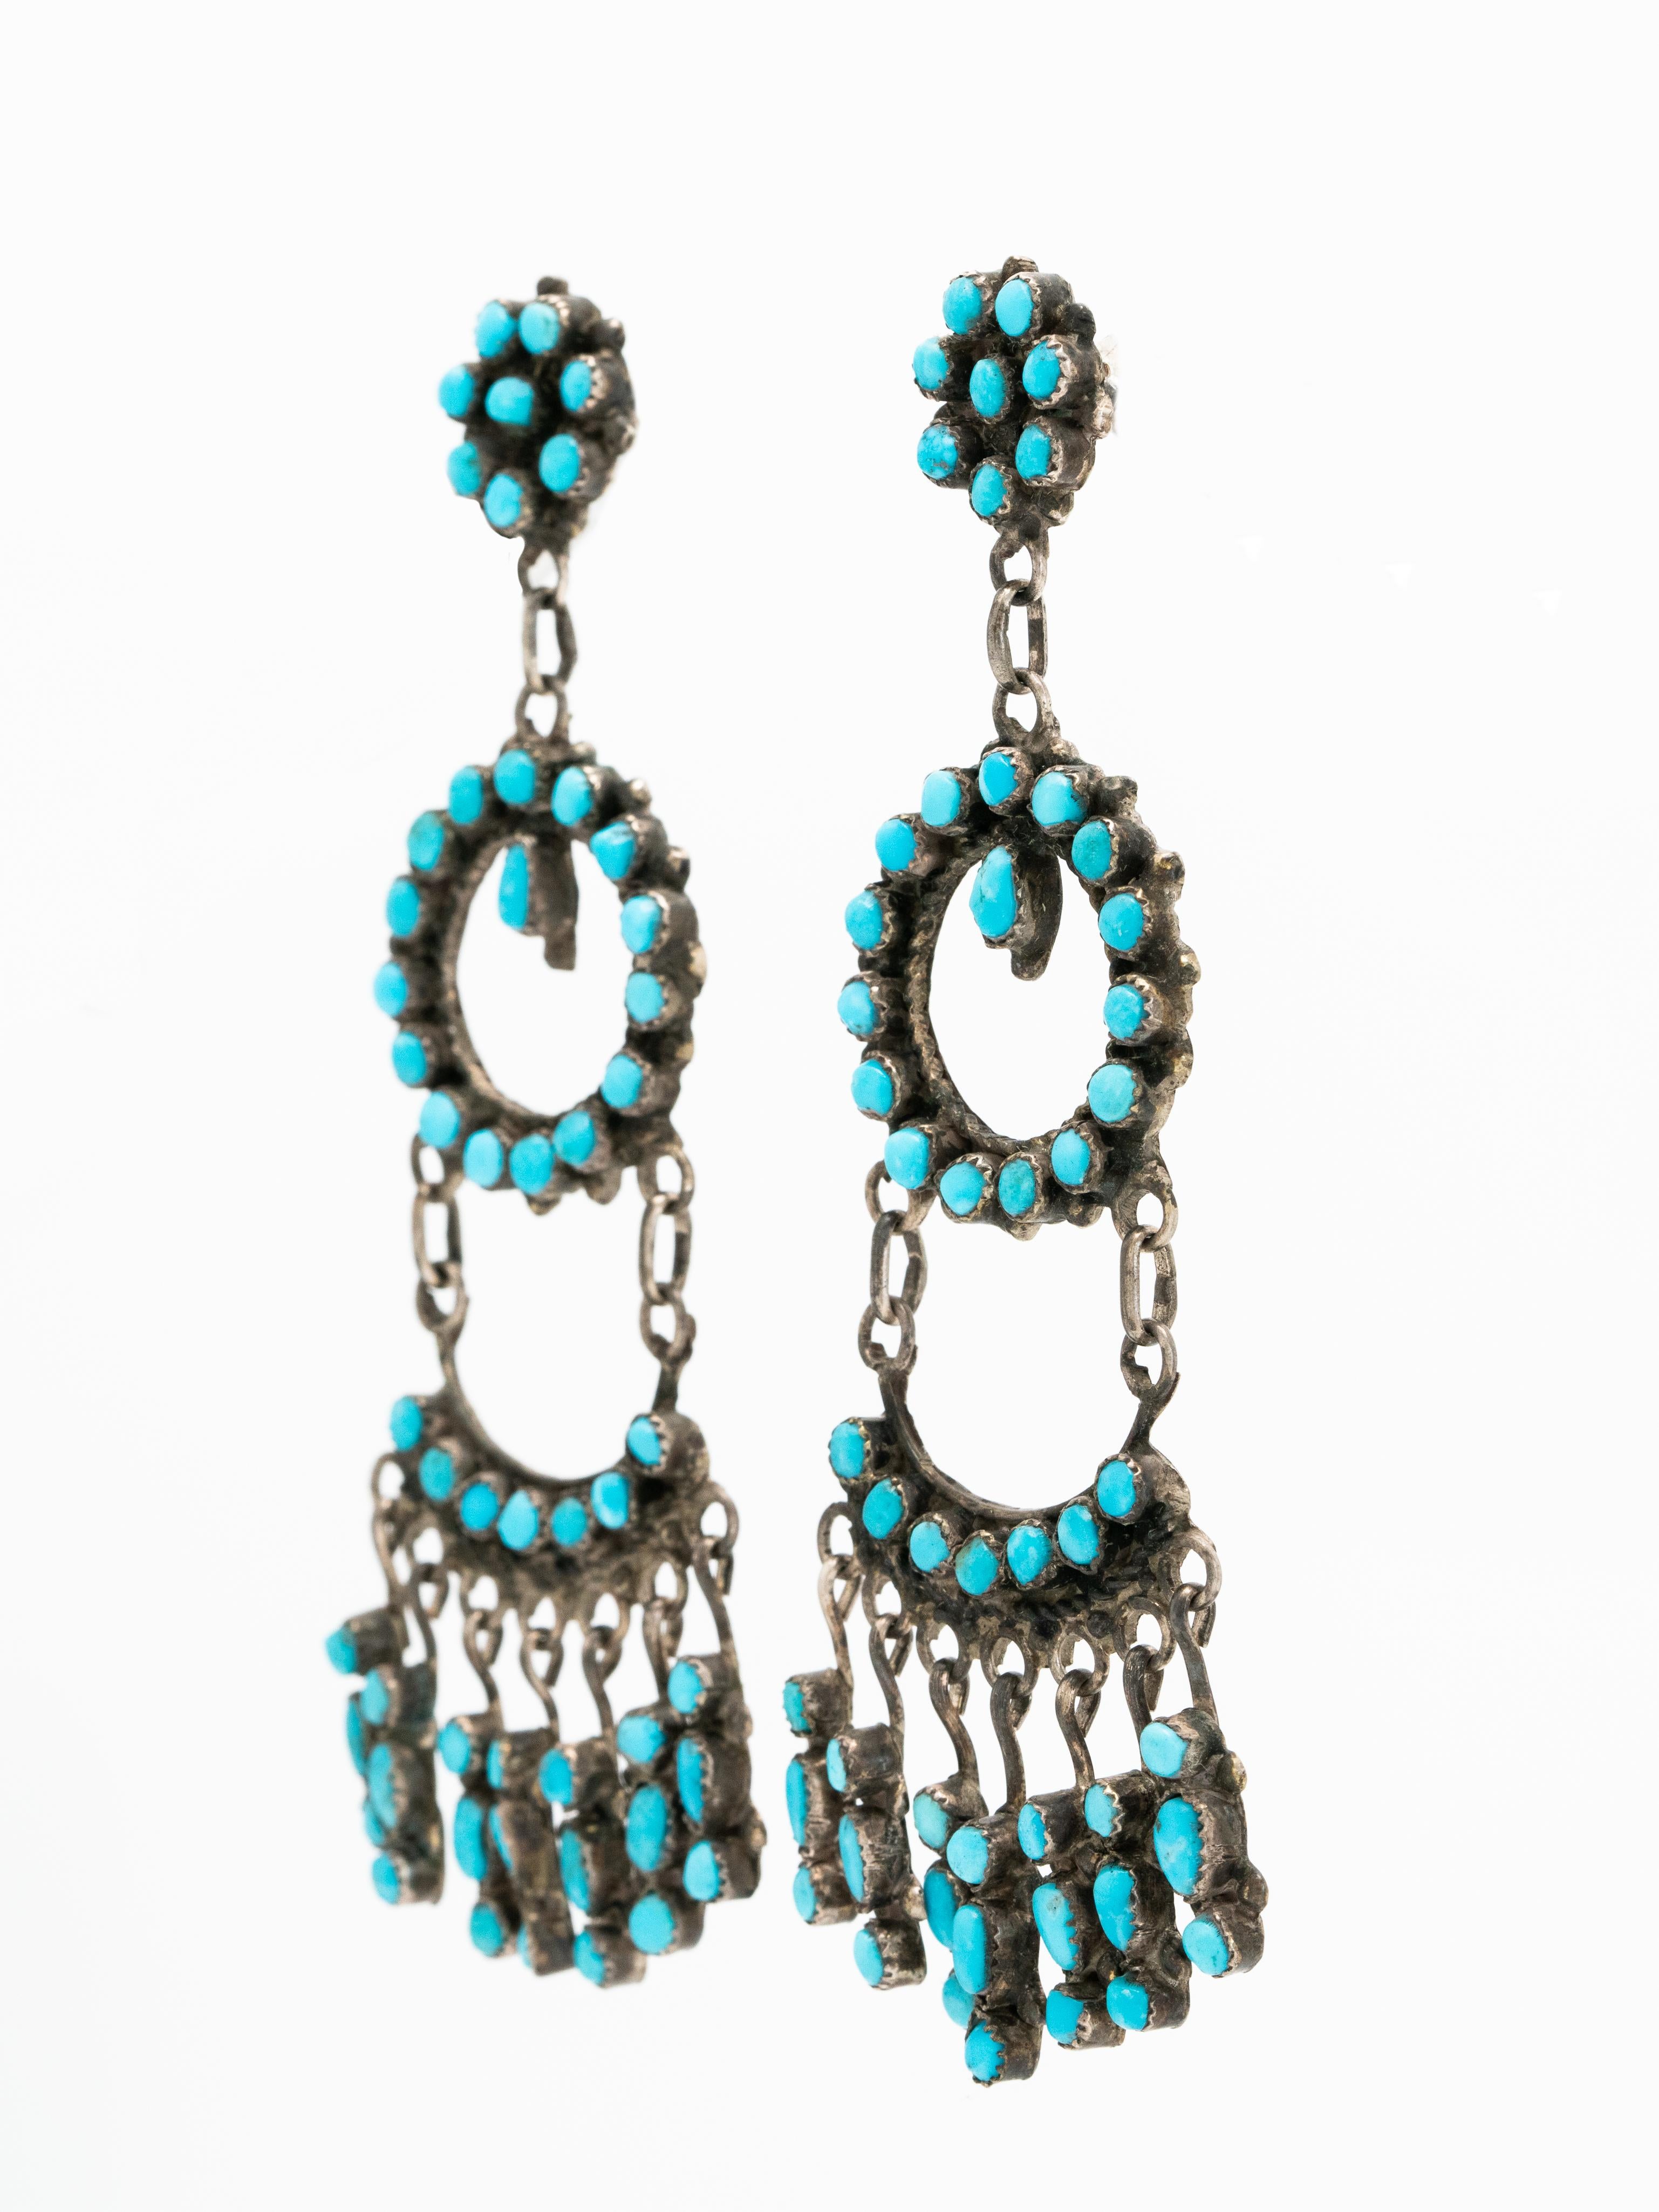 Signed Native American Zuni Silver and Turquoise Long Dangle Earrings c.1970s

Influenced by Spanish jewelry these dramatic vintage Zuni earrings are stunning. 

Length: 94.21mm
Width at widest point: 35.81mm
Weight per earrings: 12.3 grams
Silver